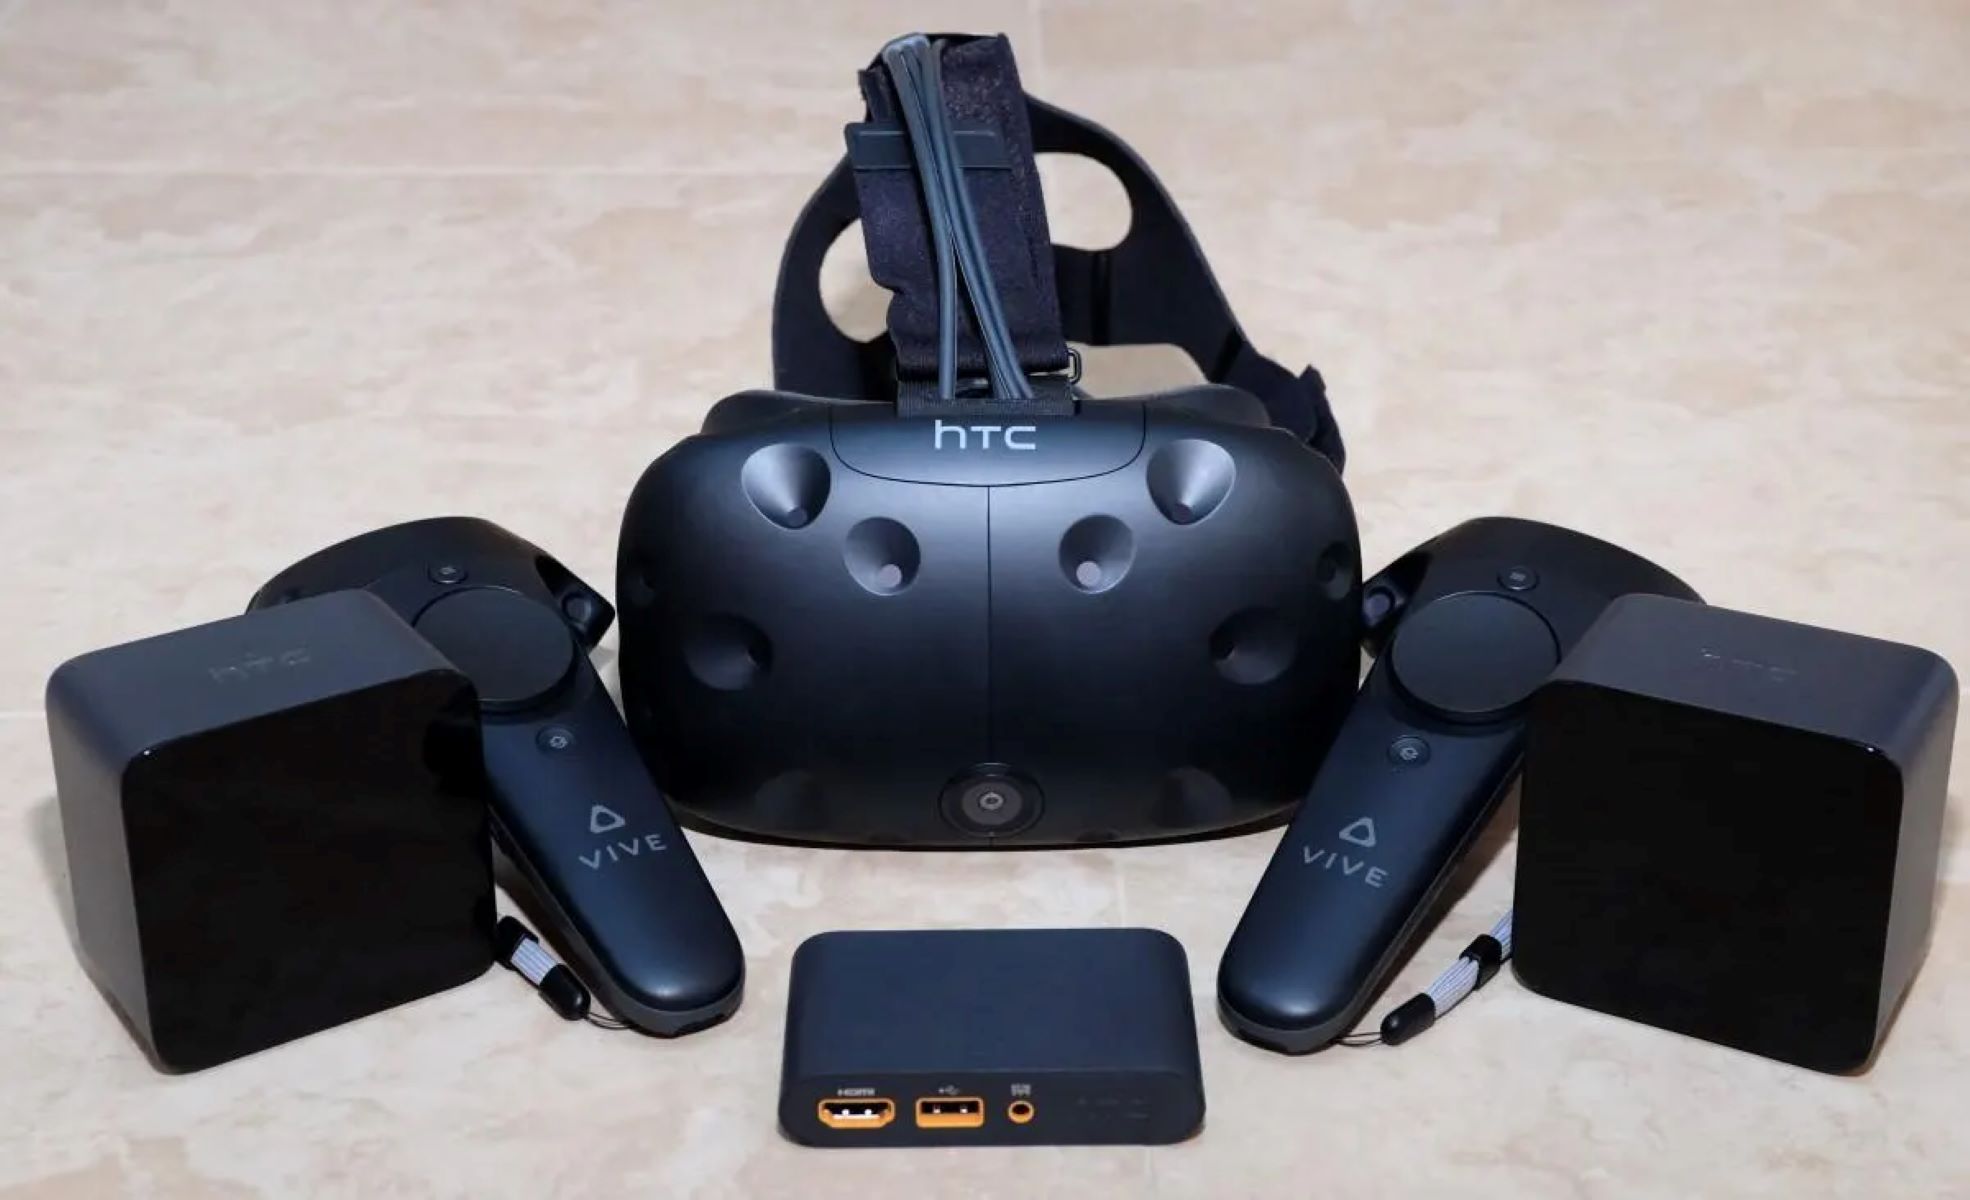 How To Make The HTC Vive Less Laggy